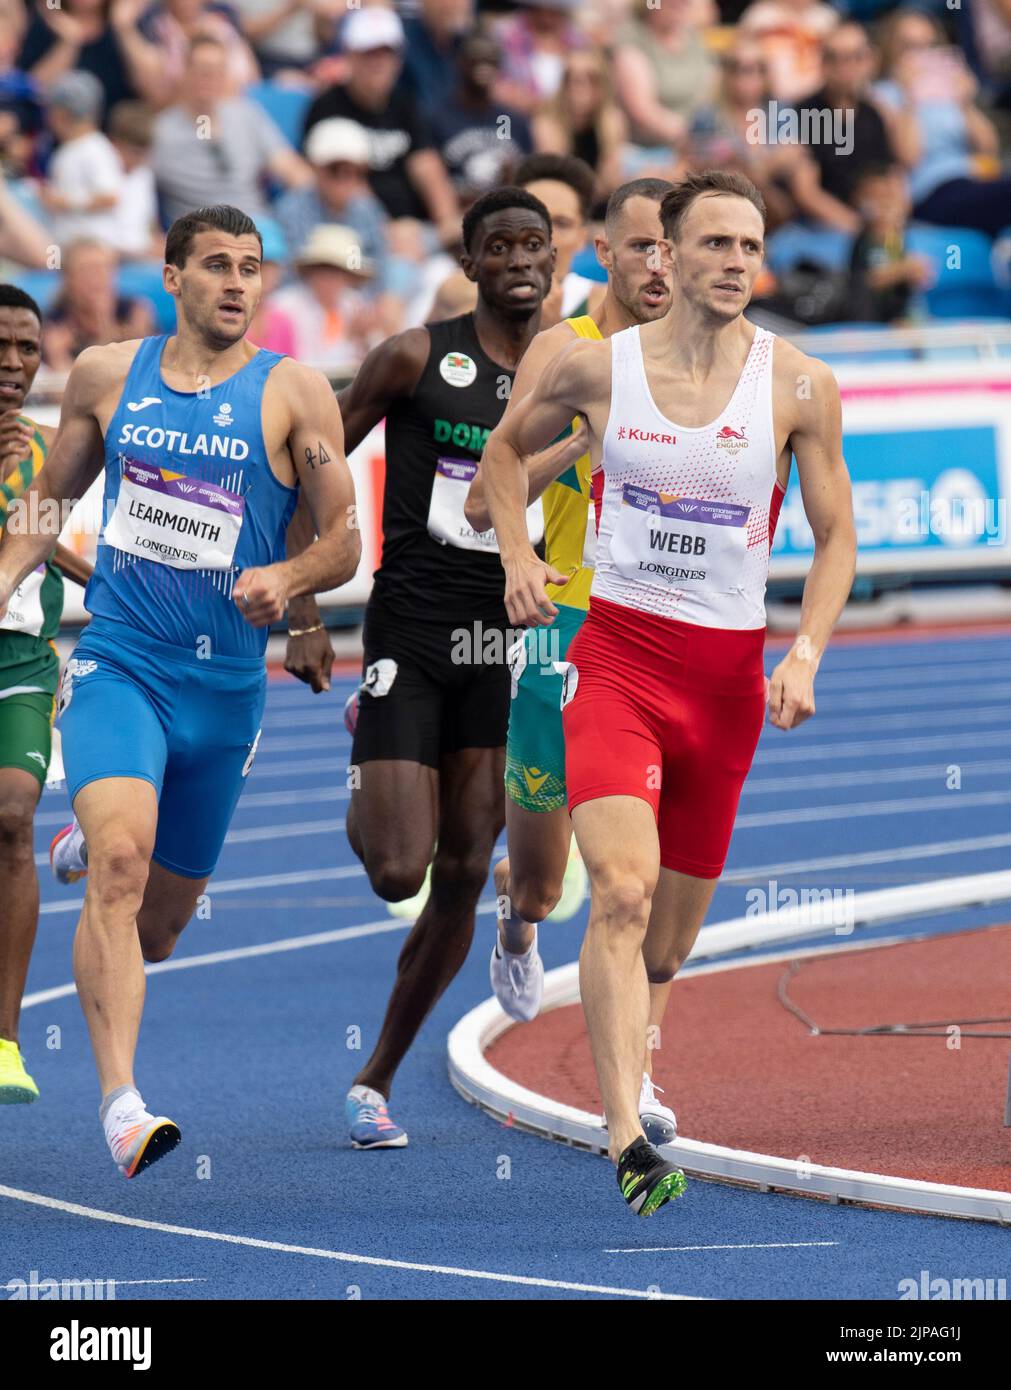 Guy Learmonth of Scotland and Jamie Webb of England competing in the 800m heats at the Commonwealth Games at Alexander Stadium, Birmingham, England, o Stock Photo